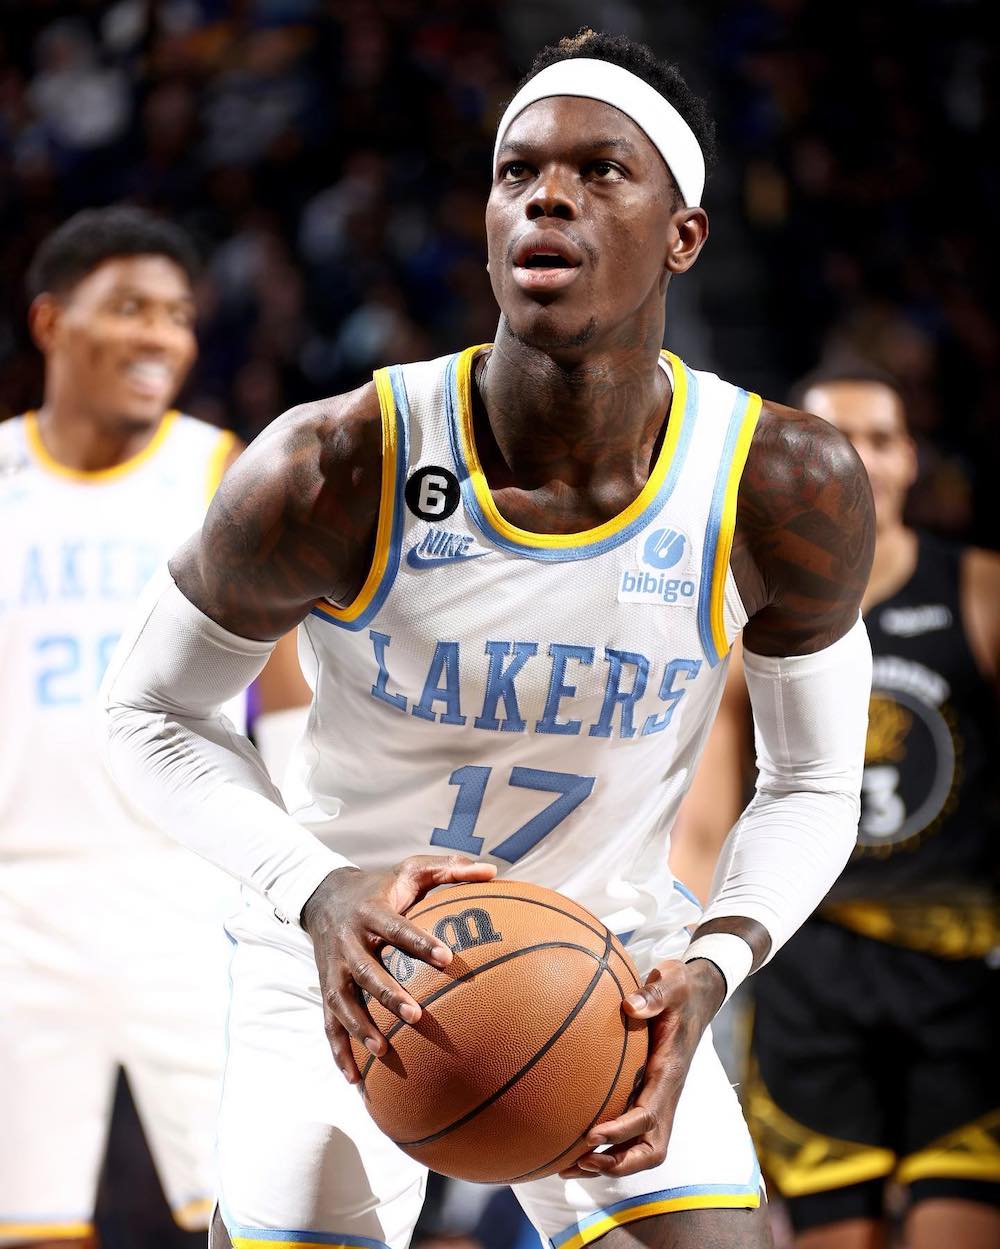 Boston alum Dennis Schroder has tattoos for Celtics AND Lakers